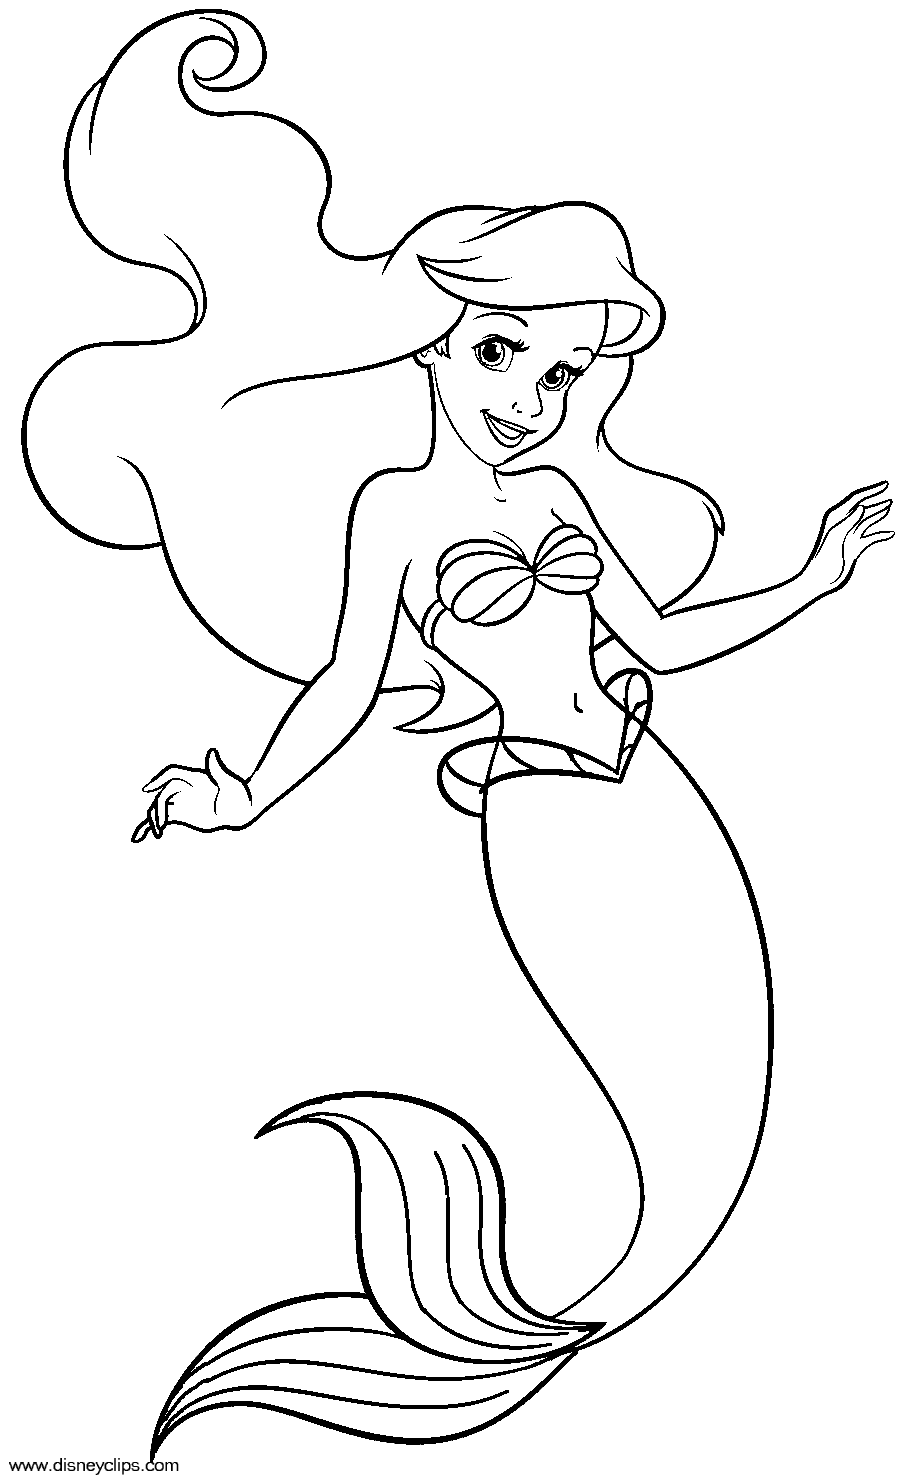 mermaid coloring page little mermaid coloring pages to download and print for free coloring mermaid page 